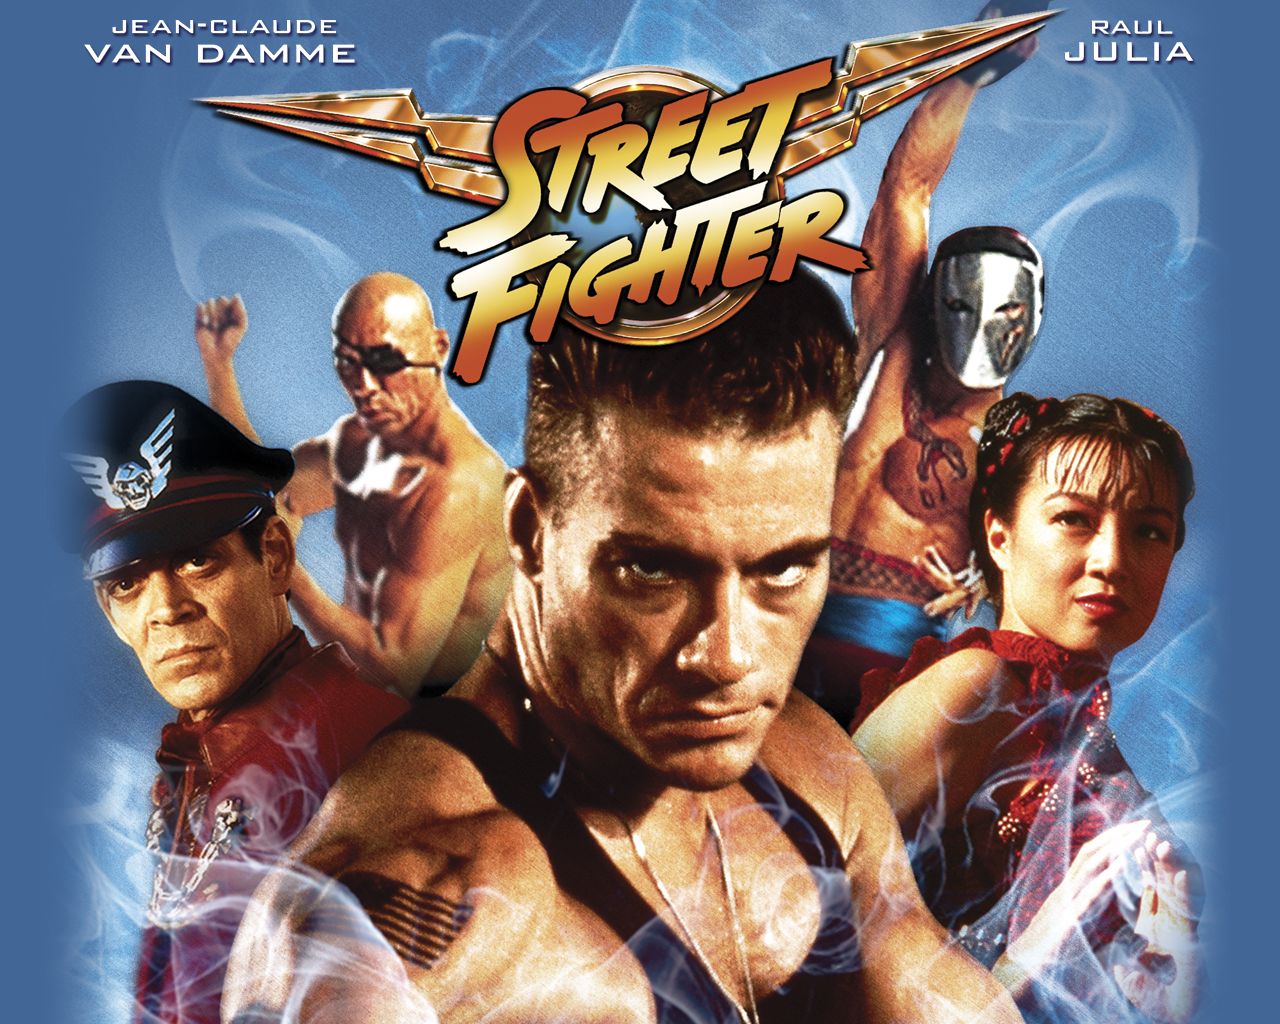 Street Fighter 1994 Movie Posters - HD Wallpaper 